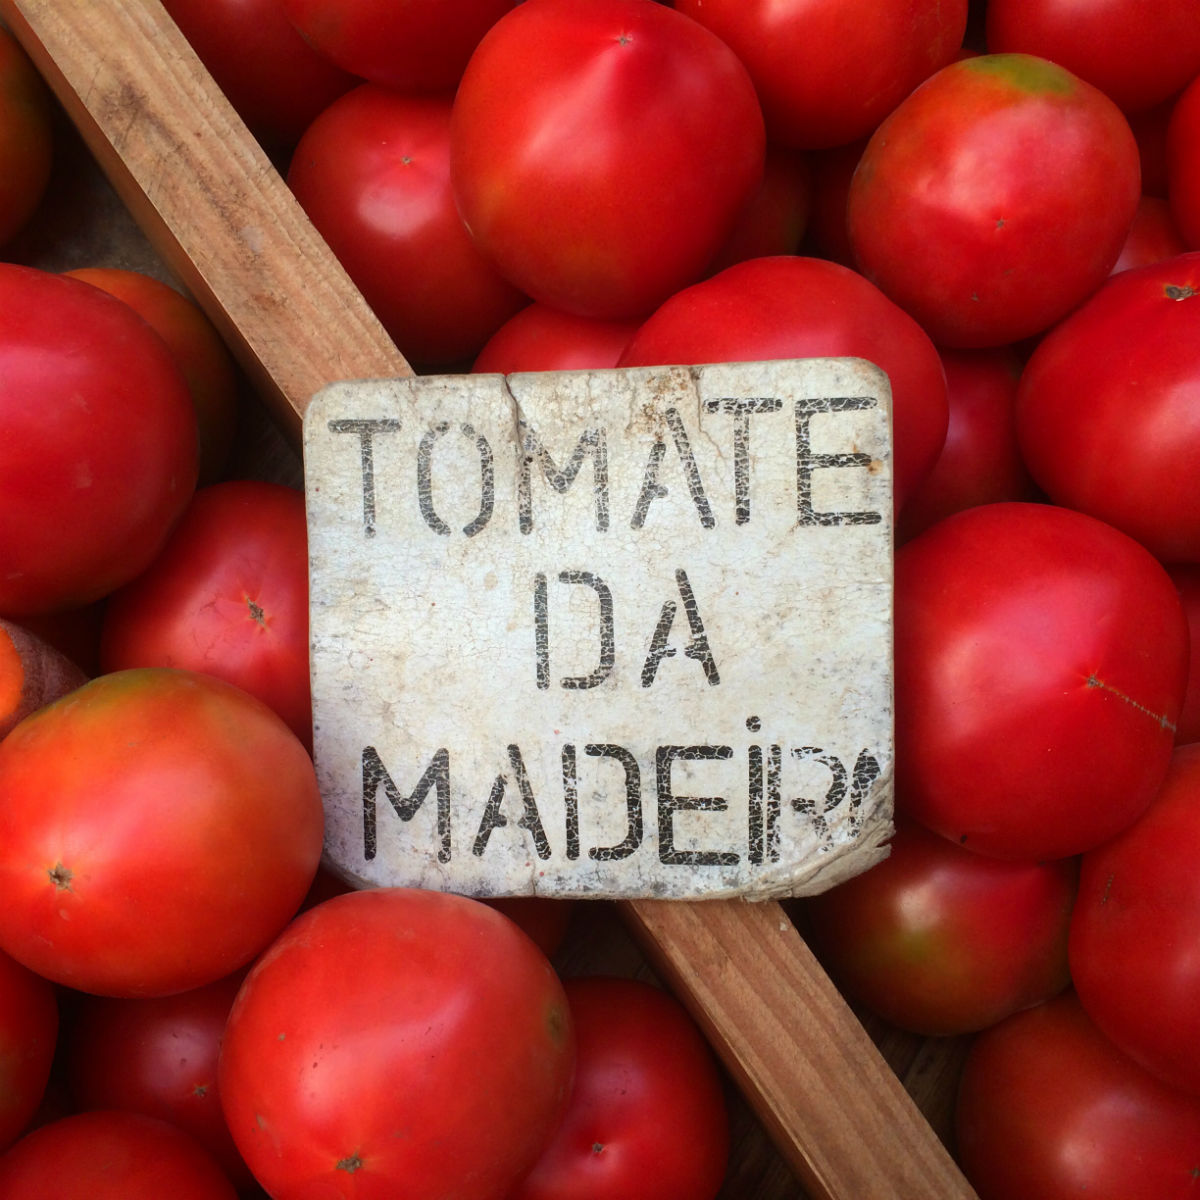 Market in Funchal, Madeira: tomatoes